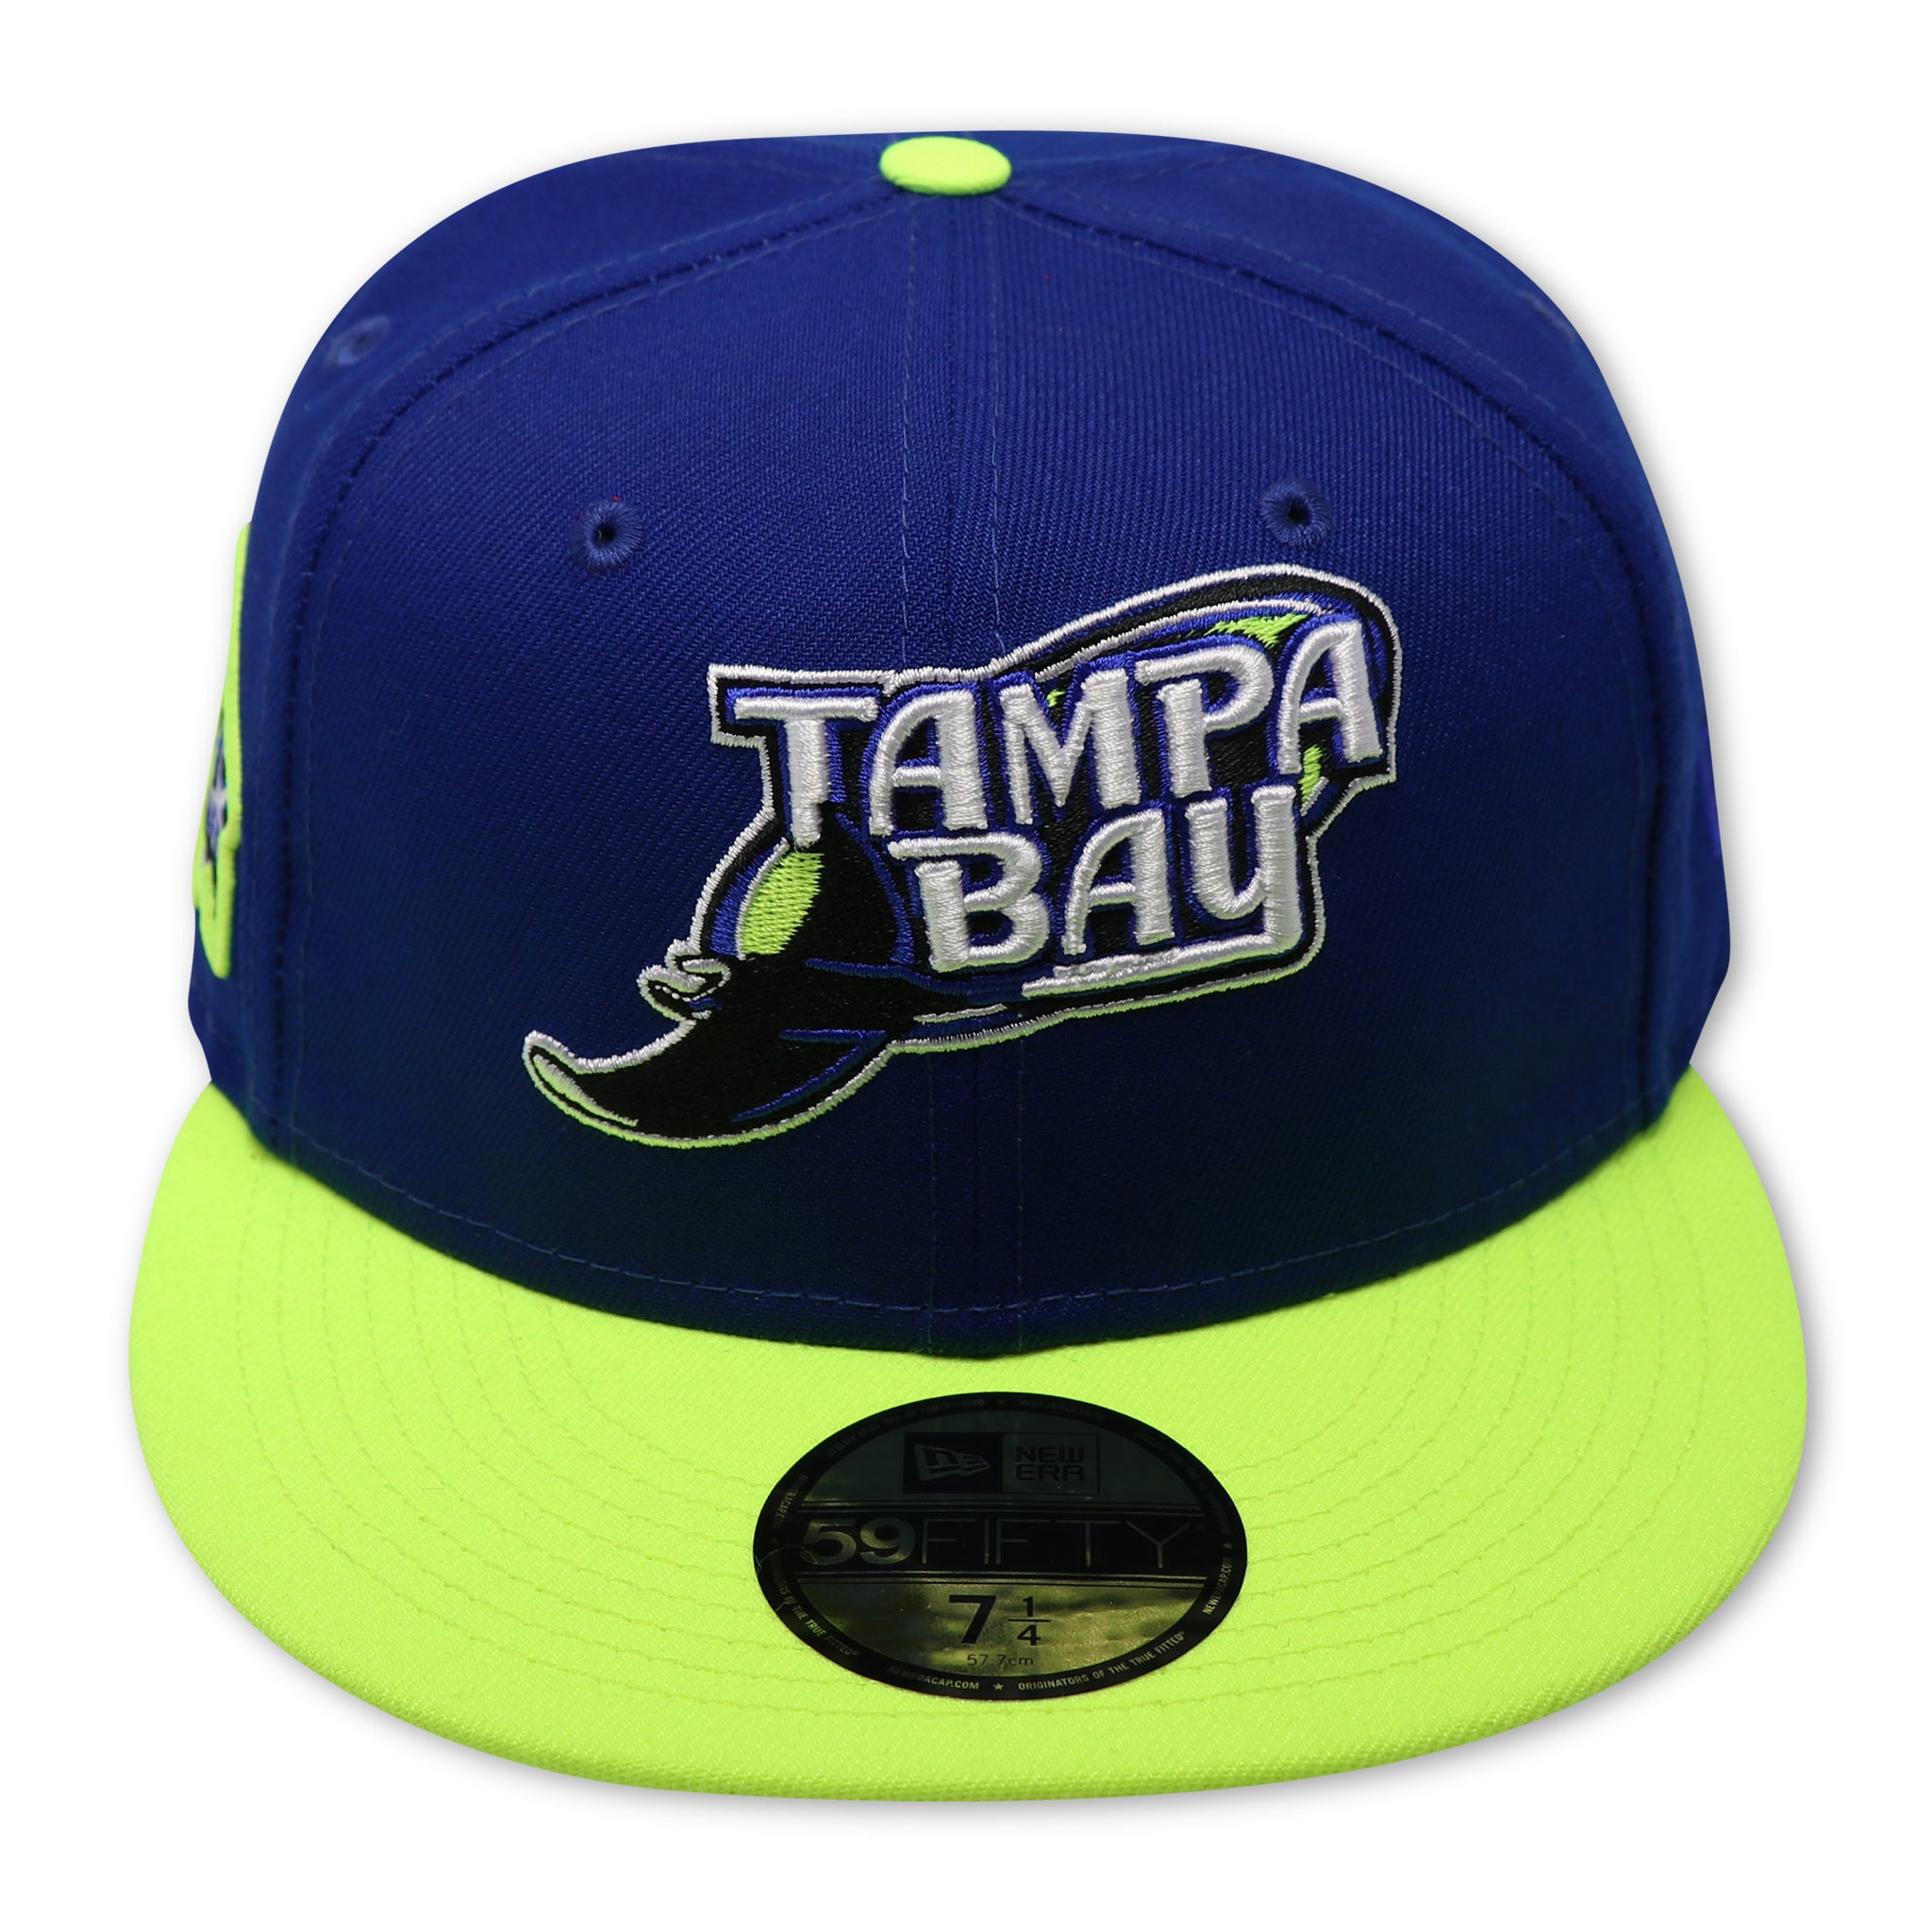 TAMPA BAY DEVIL RAYS (ROYAL) (10TH SEASON) NEW ERA 59FIFTY FITTED (GREY UNDER VISOR) (S)